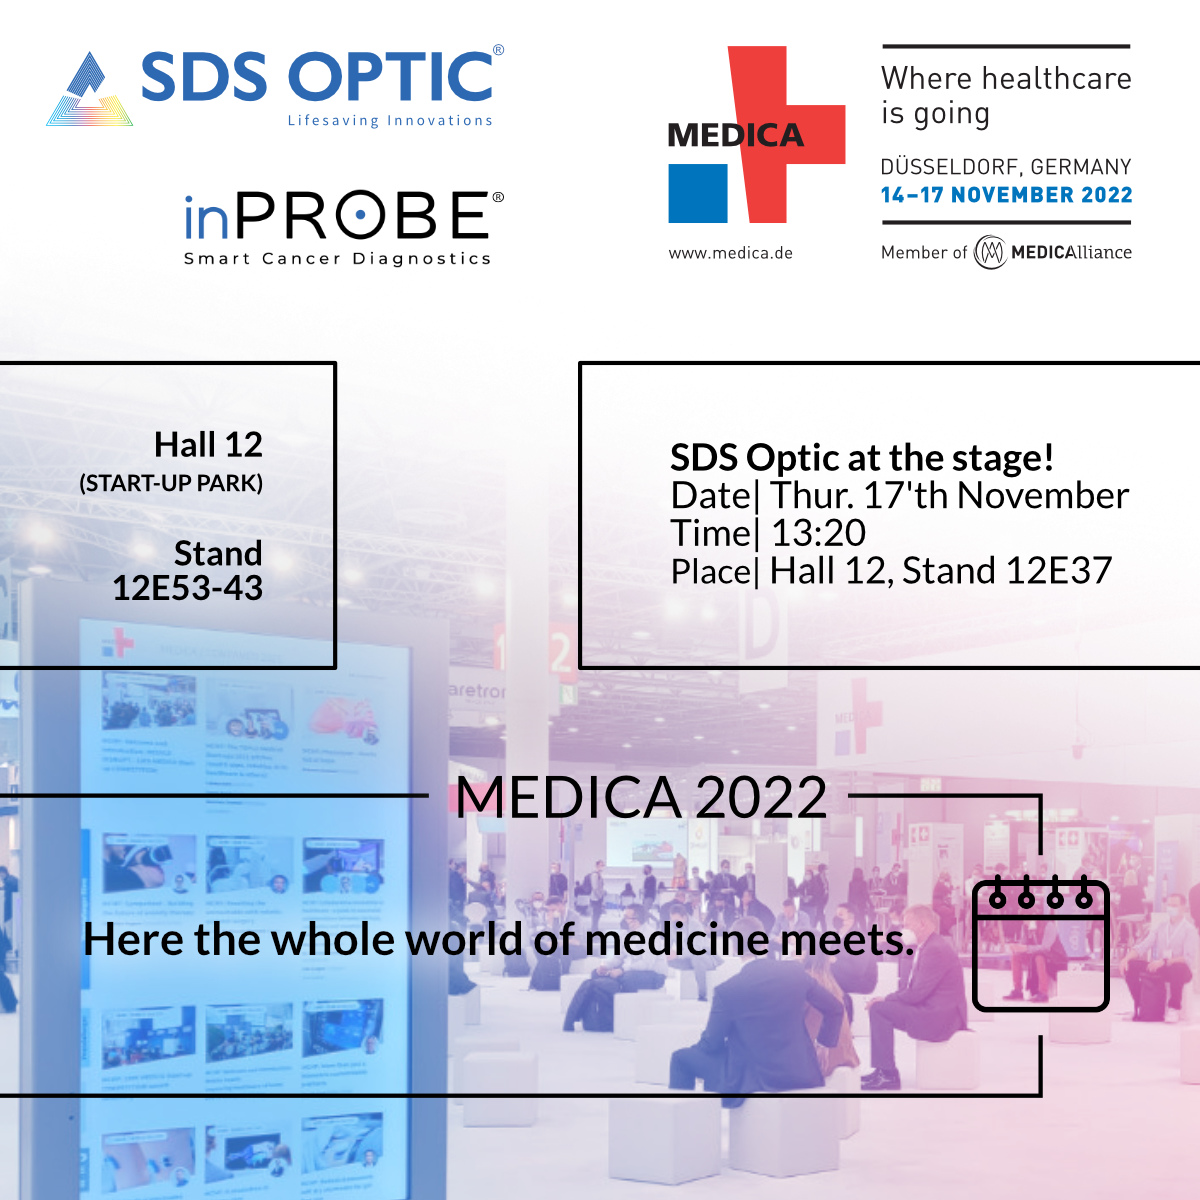 🔥🇬🇧 @MEDICATradeFair 2022 is coming and @SDS_Optic will be there. You will find us in 𝗛𝗮𝗹𝗹 𝟭𝟮, 𝘀𝘁𝗮𝗻𝗱 𝟭𝟮𝗘𝟱𝟯-𝟰𝟯. Don't miss out our 𝗰𝗼𝗺𝗽𝗮𝗻𝘆 𝗽𝗿𝗲𝘀𝗲𝗻𝘁𝗮𝘁𝗶𝗼𝗻 𝗮𝘁 𝘁𝗵𝗲 𝘀𝘁𝗮𝗴𝗲 (Hall 12, Stand 12E37), on Thursday (17'th of November) at 13:20!